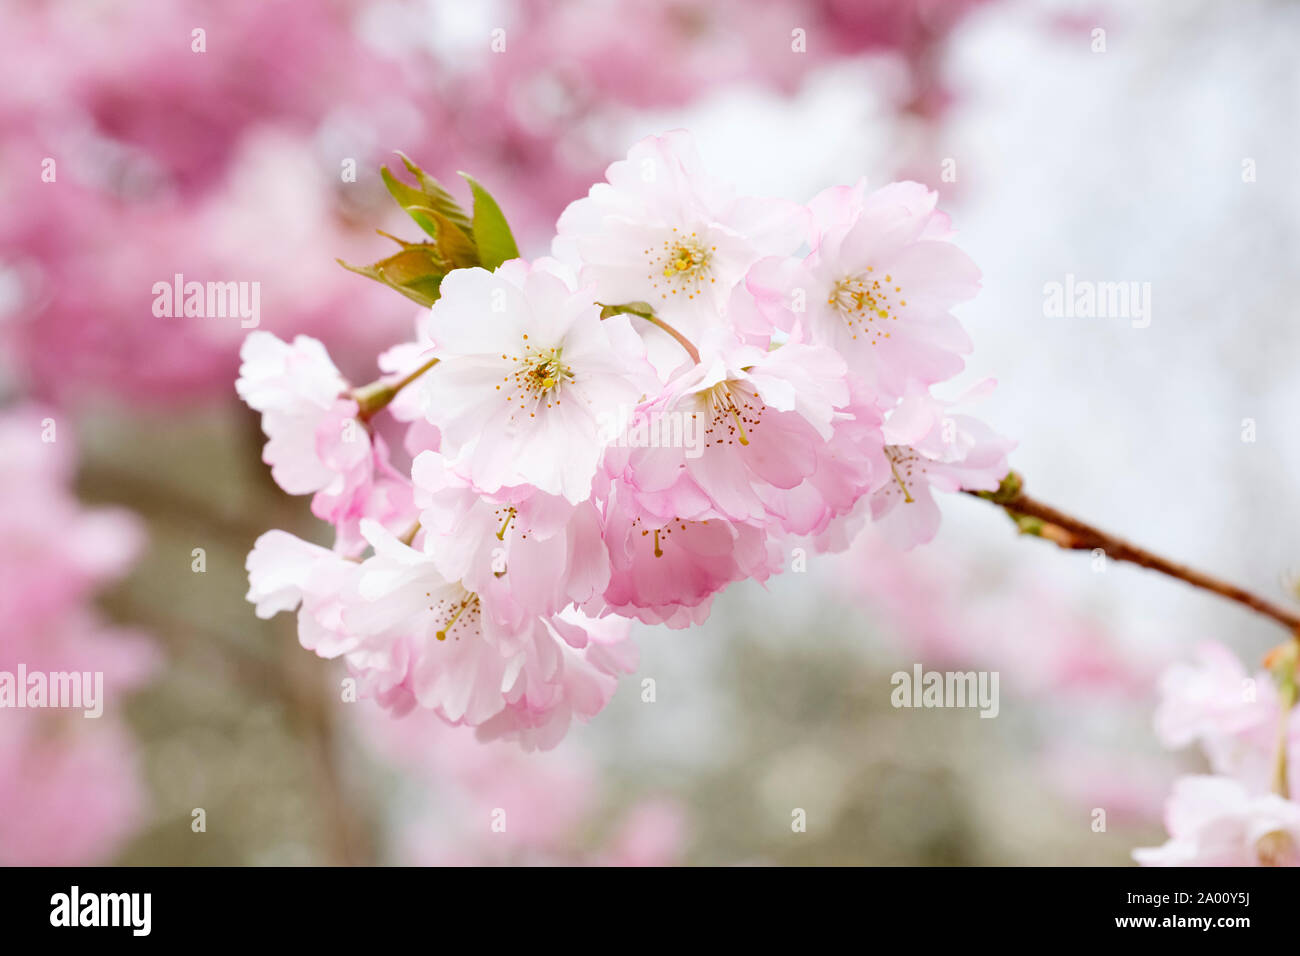 Close-up of pale pink blossom of spreading cherry tree, Prunus 'Accolade'or Cherry 'Accolade'. Stock Photo